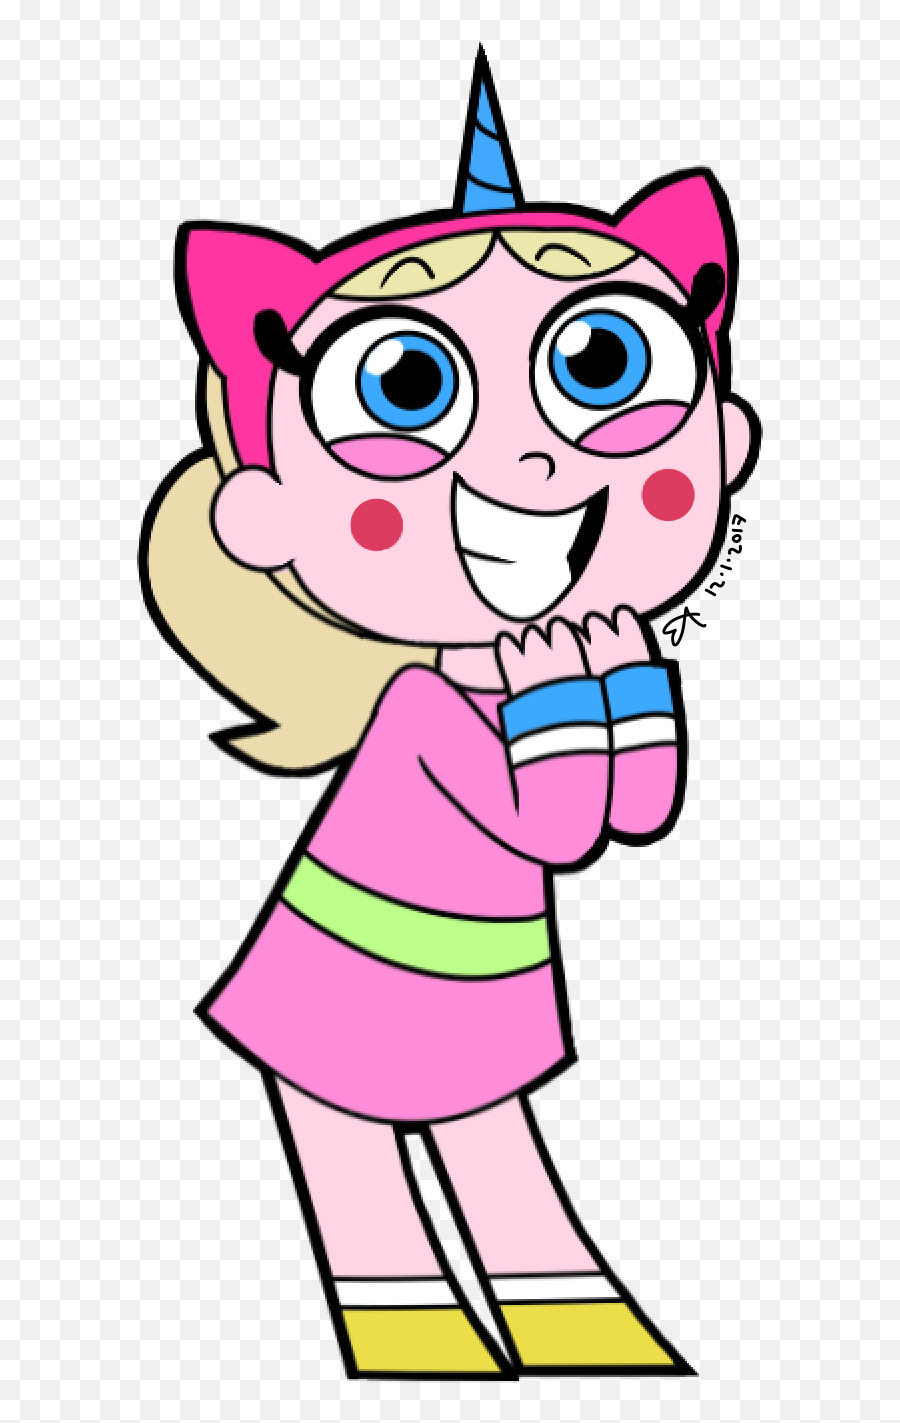 Unikitty As A Human - 799x1467 Png Clipart Download Unikitty As A Human,Human Png